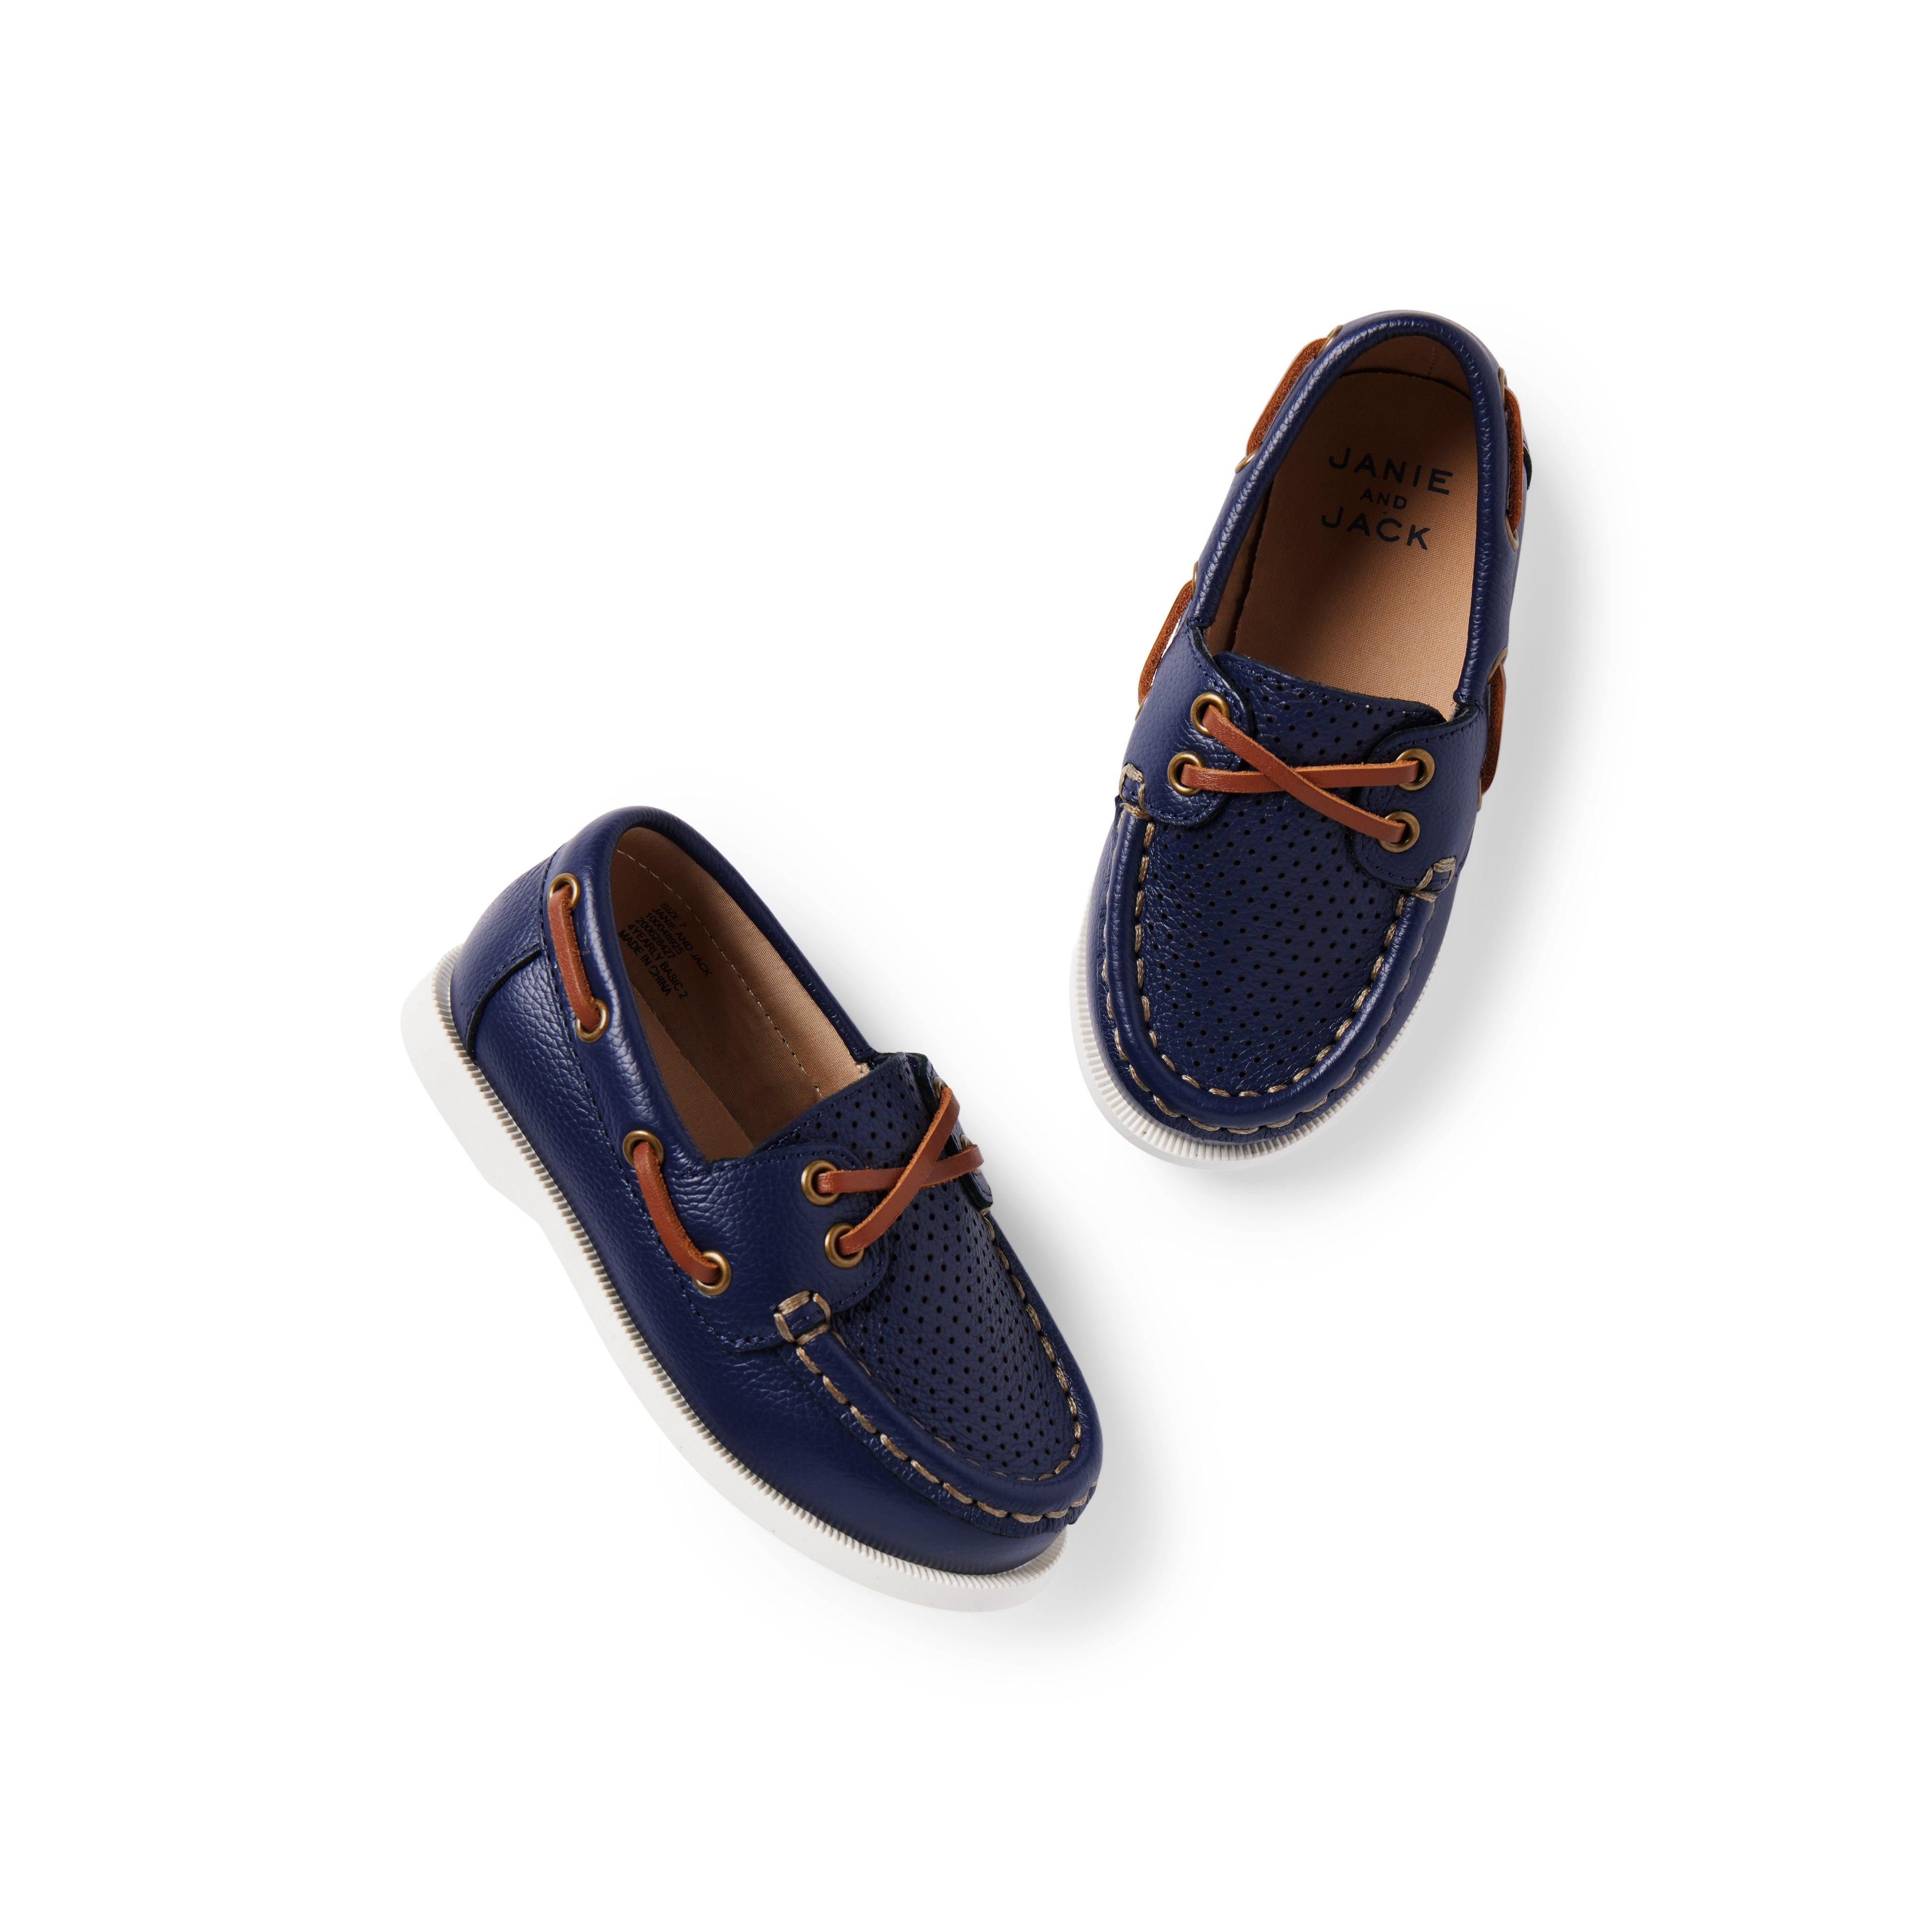 Boy Merchant Marine Perforated Boat Shoe by Janie and Jack